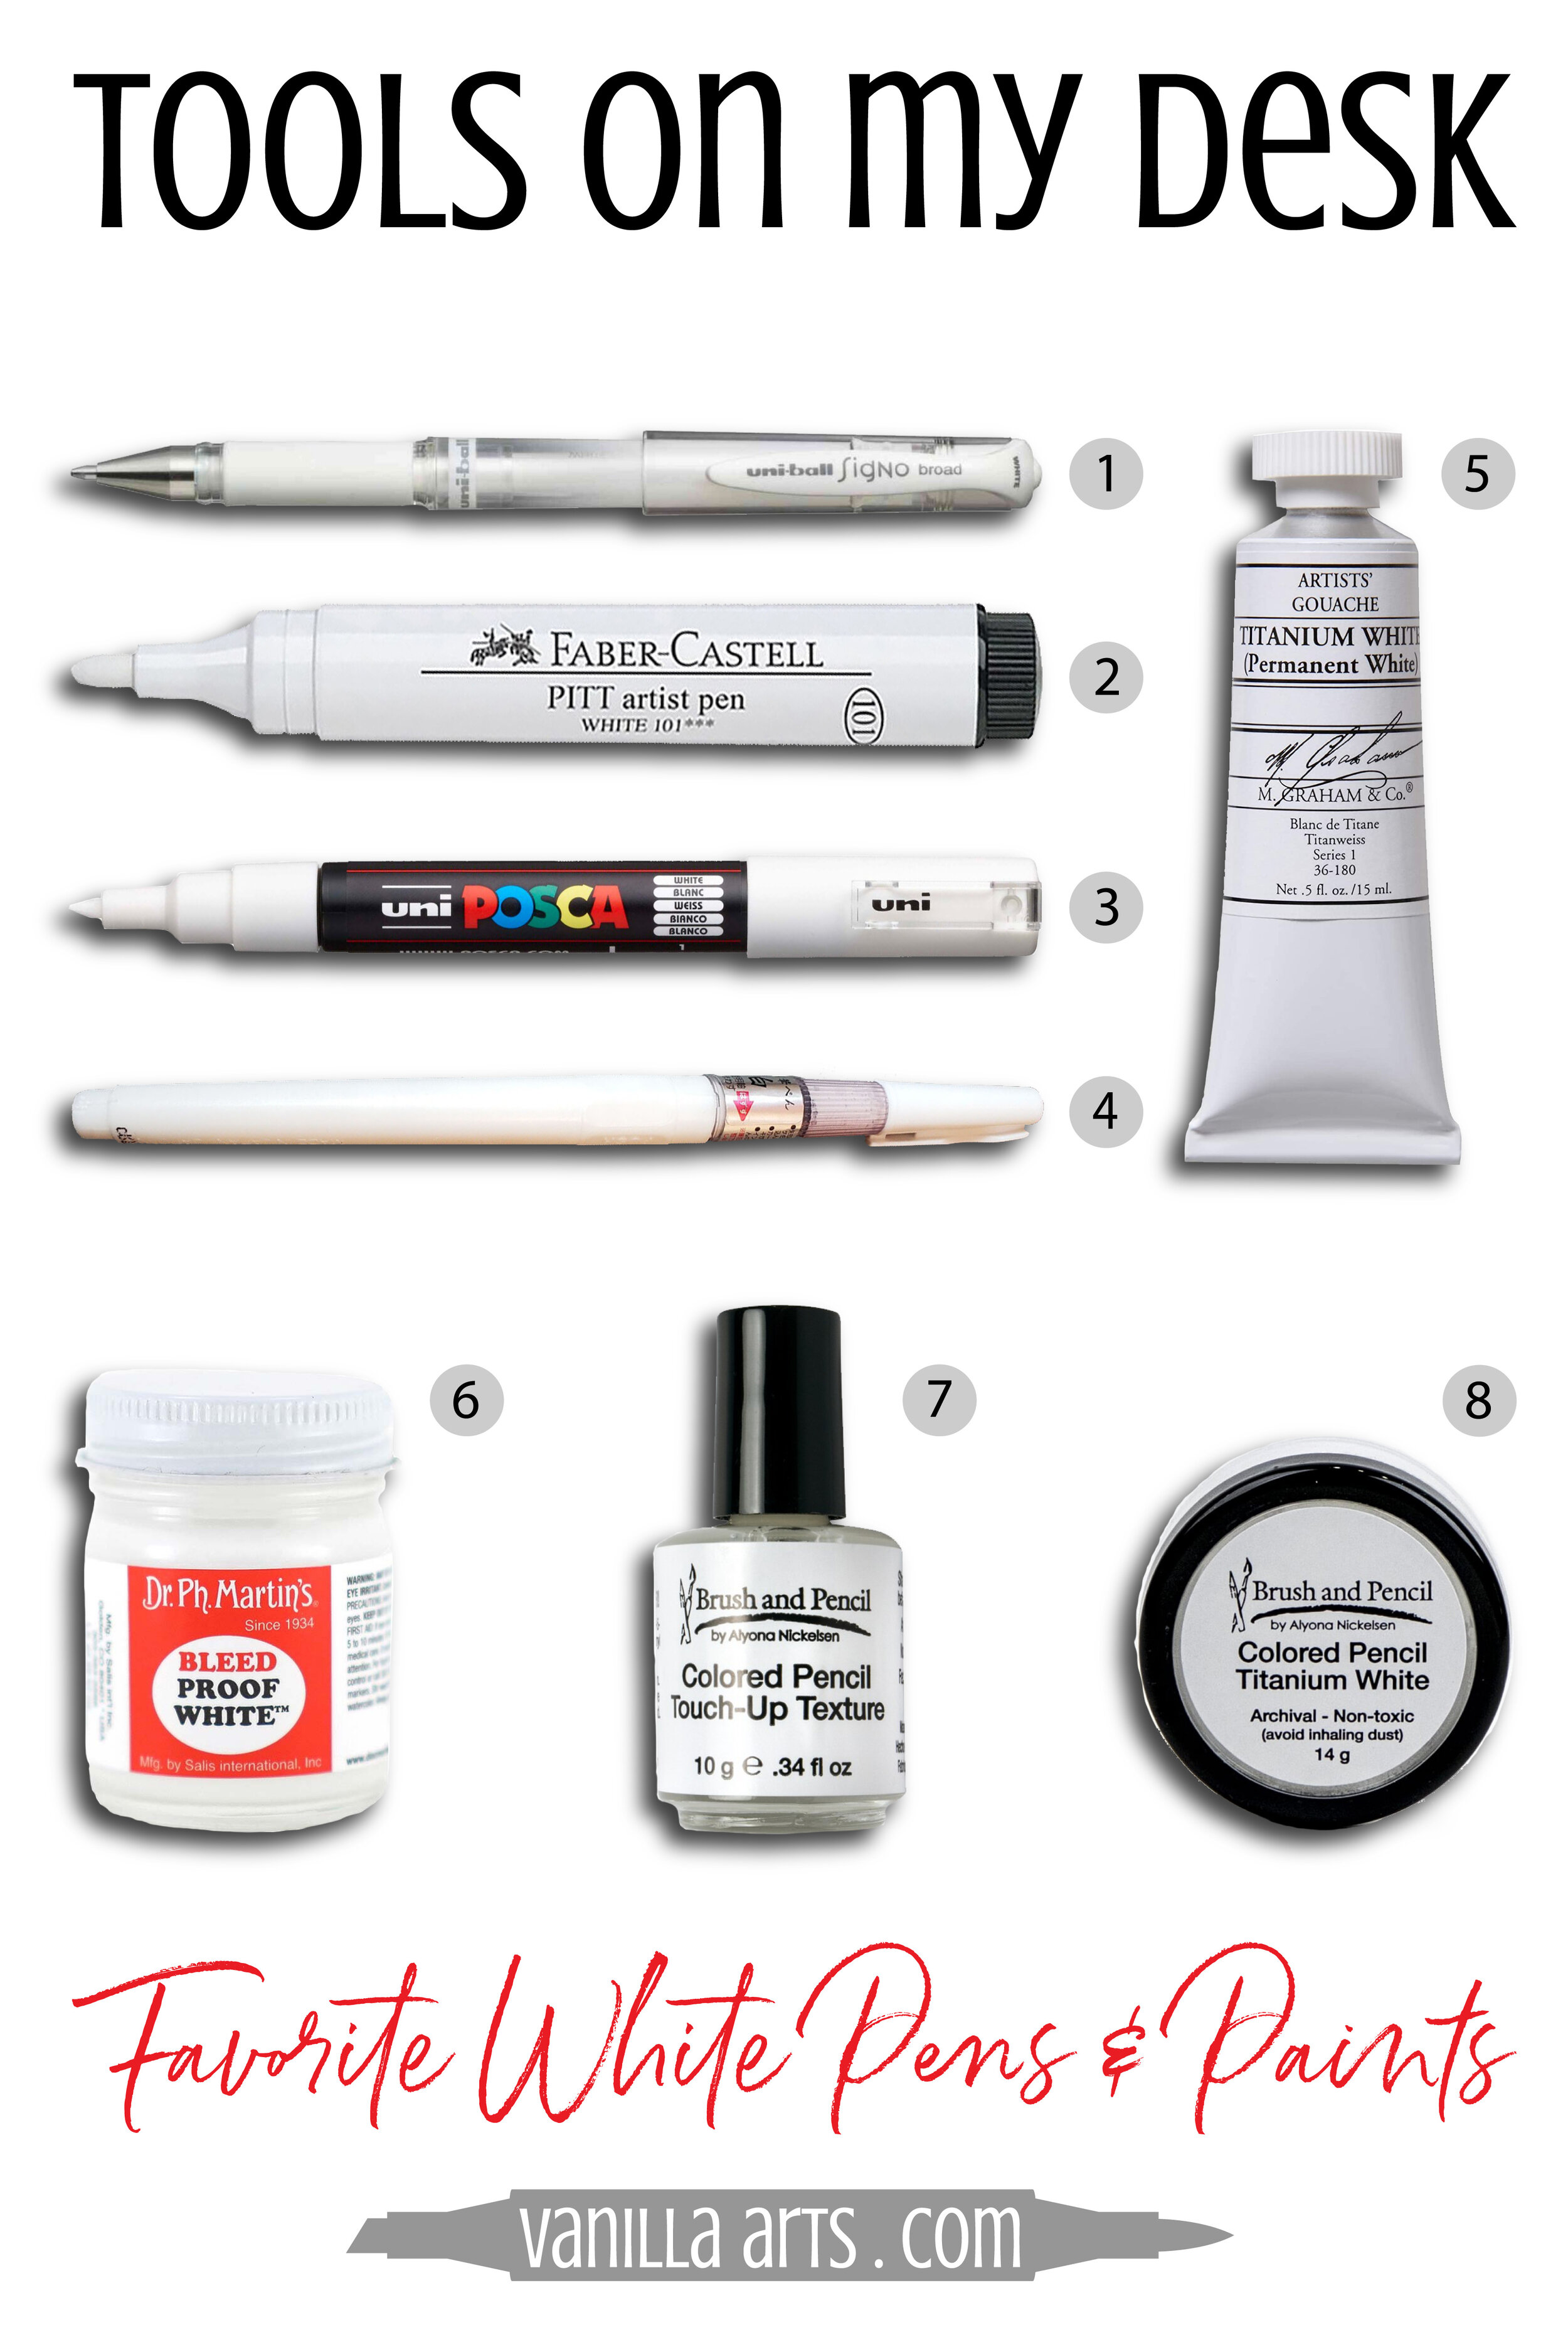 How to Use White Pens (For Highlights, Art & More!)